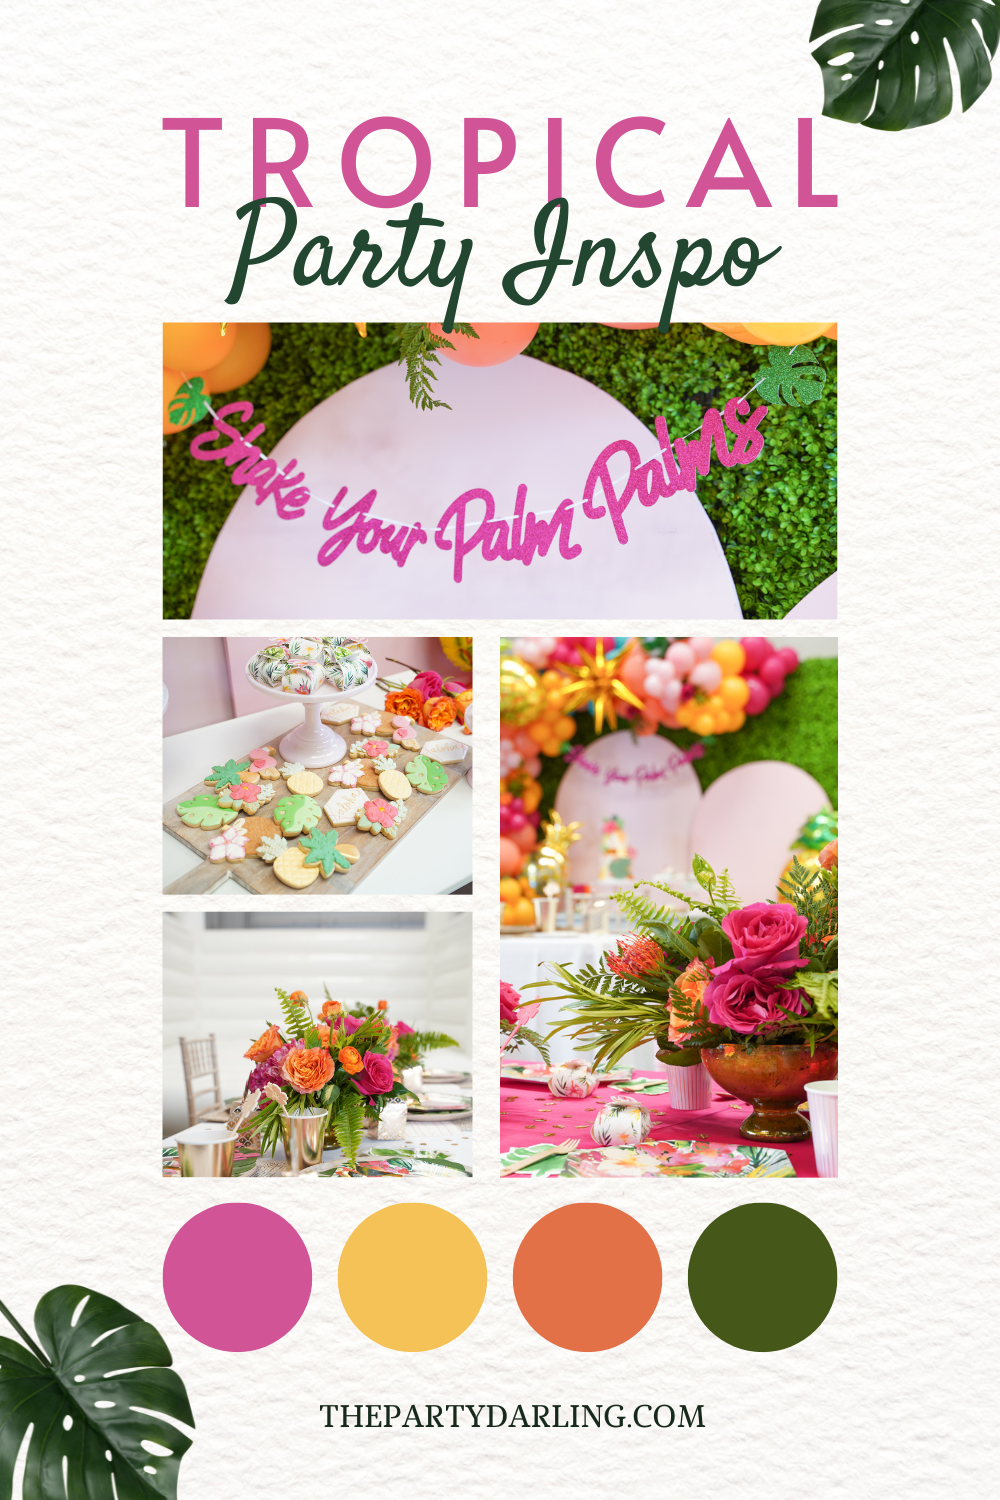 Tropical Party Inspiration Blog Post | The Party Darling